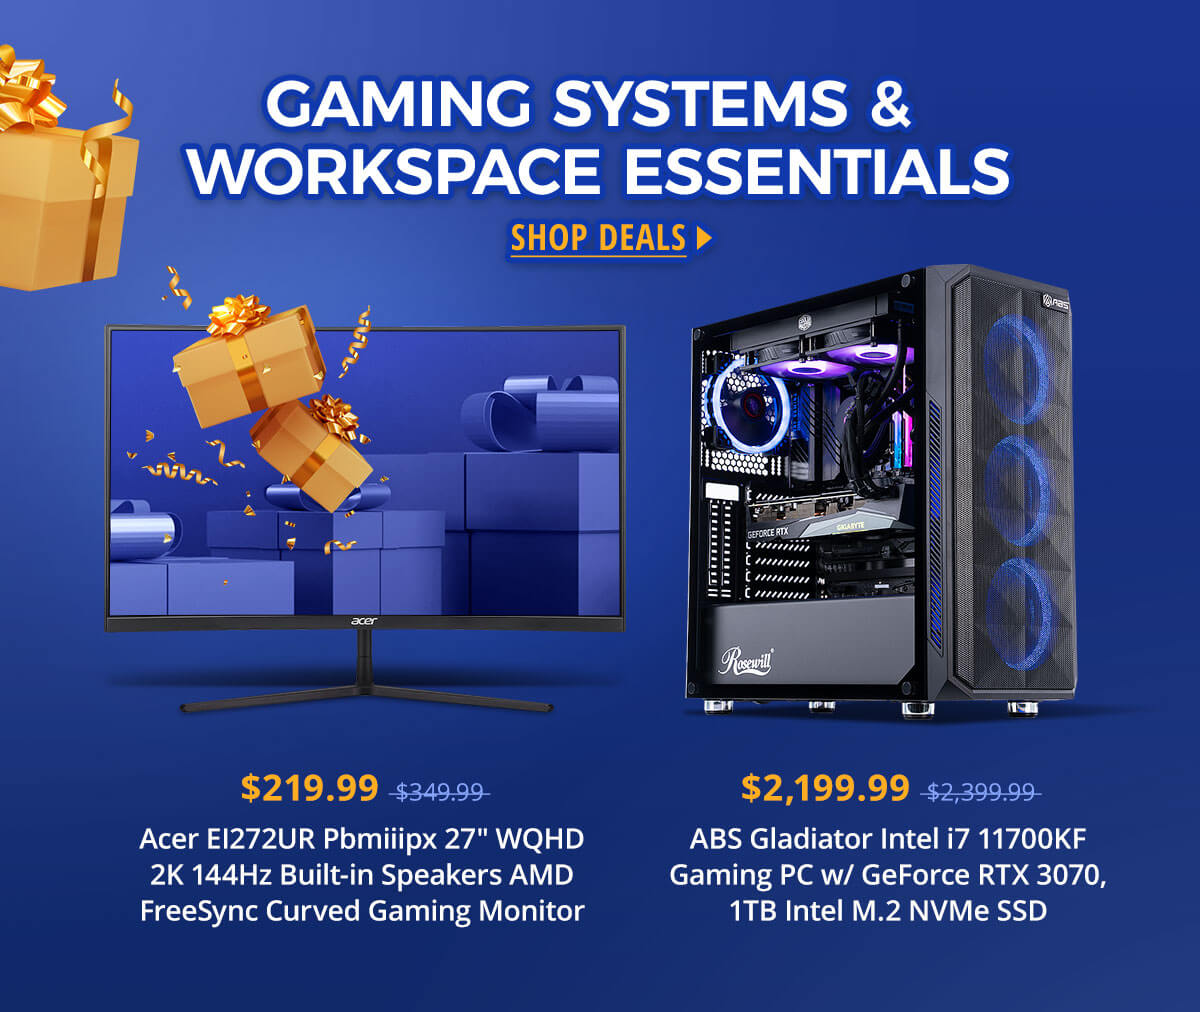 Gaming Systems & Workspace Essentials